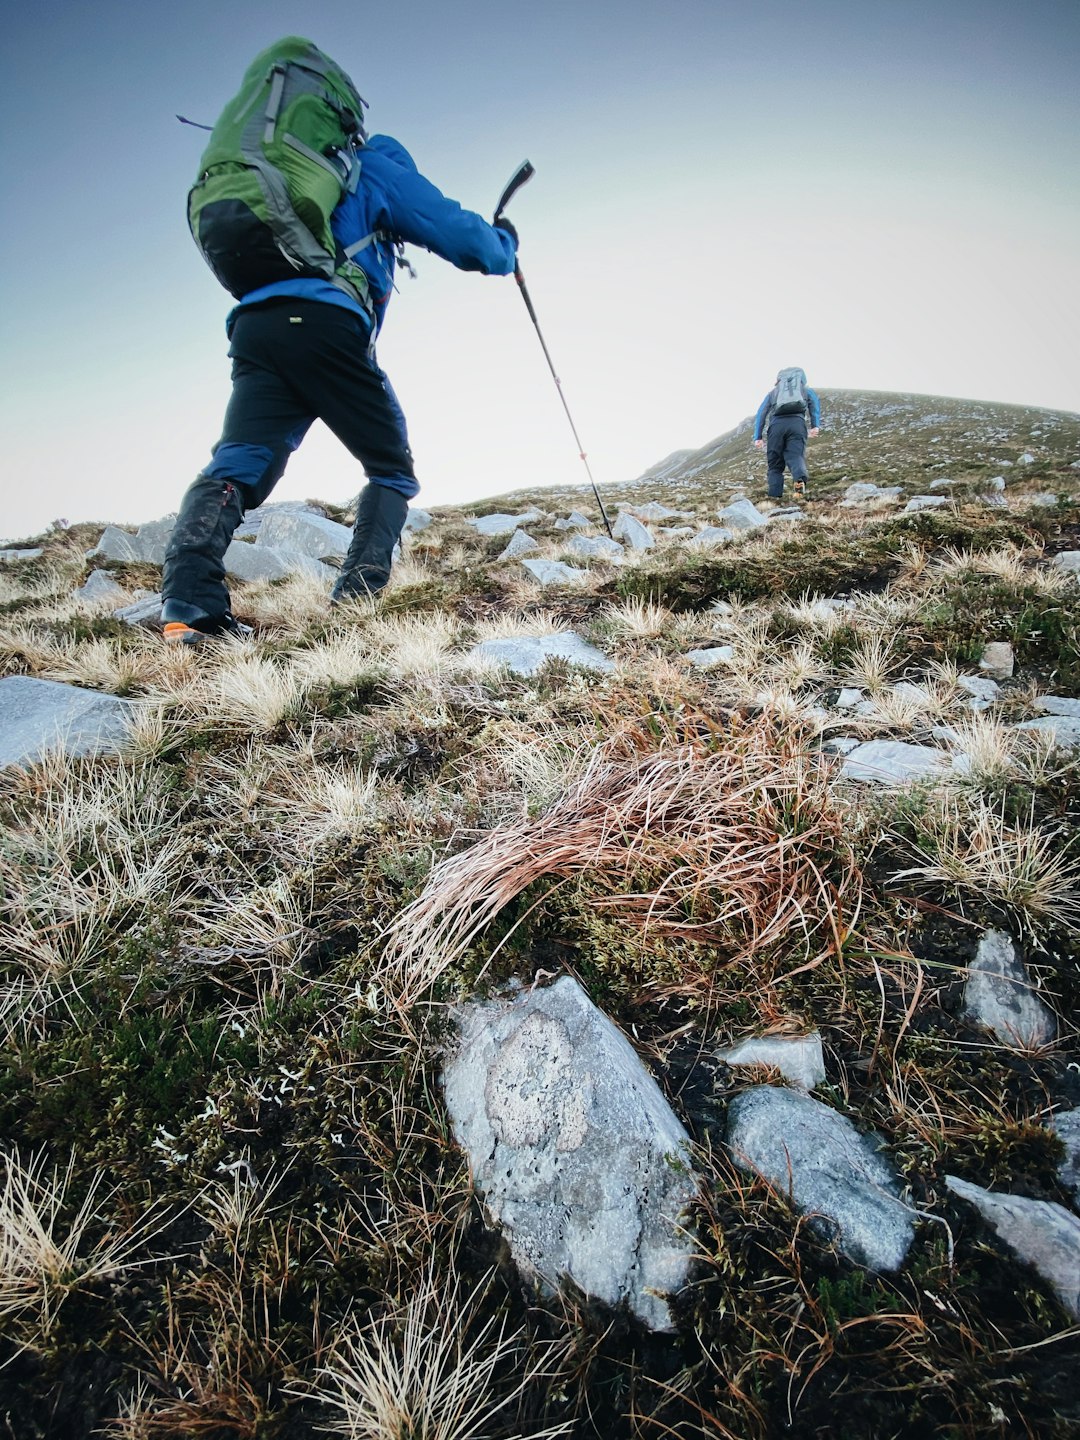 travelers stories about Mountaineering in Co. Donegal, Ireland